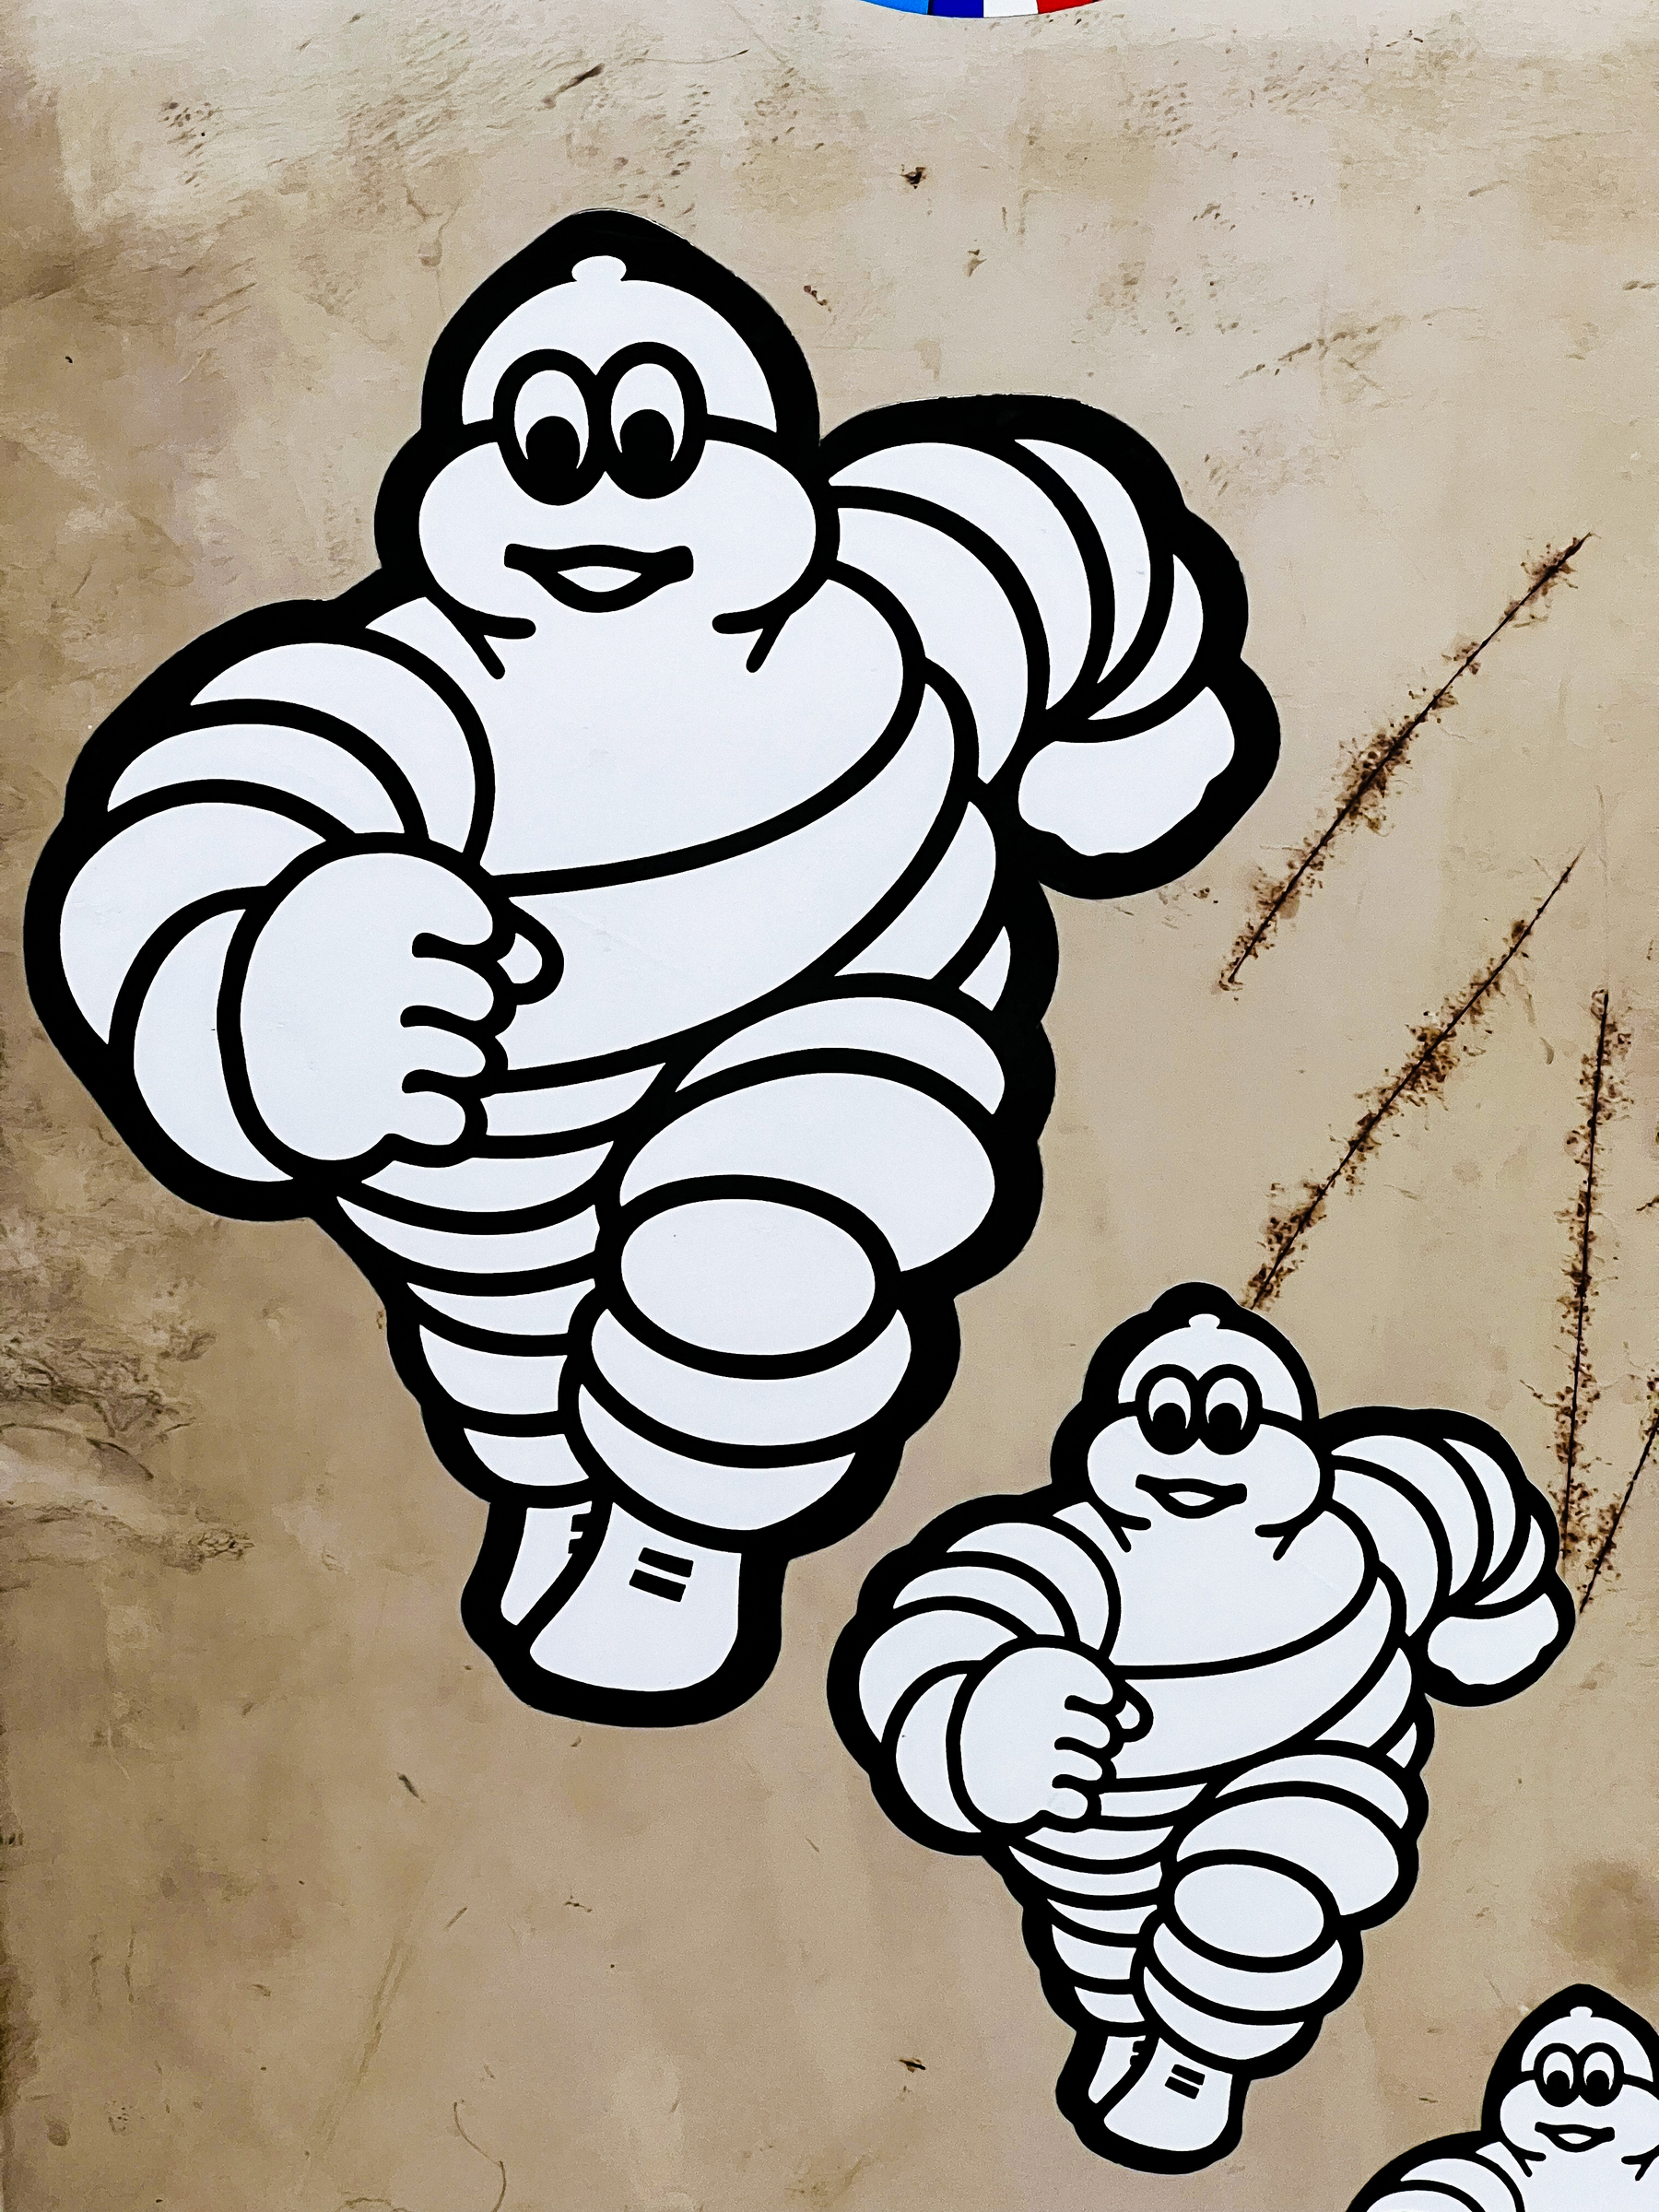 Three Michelin Men cartoon characters, decreasing in size, against a textured background.